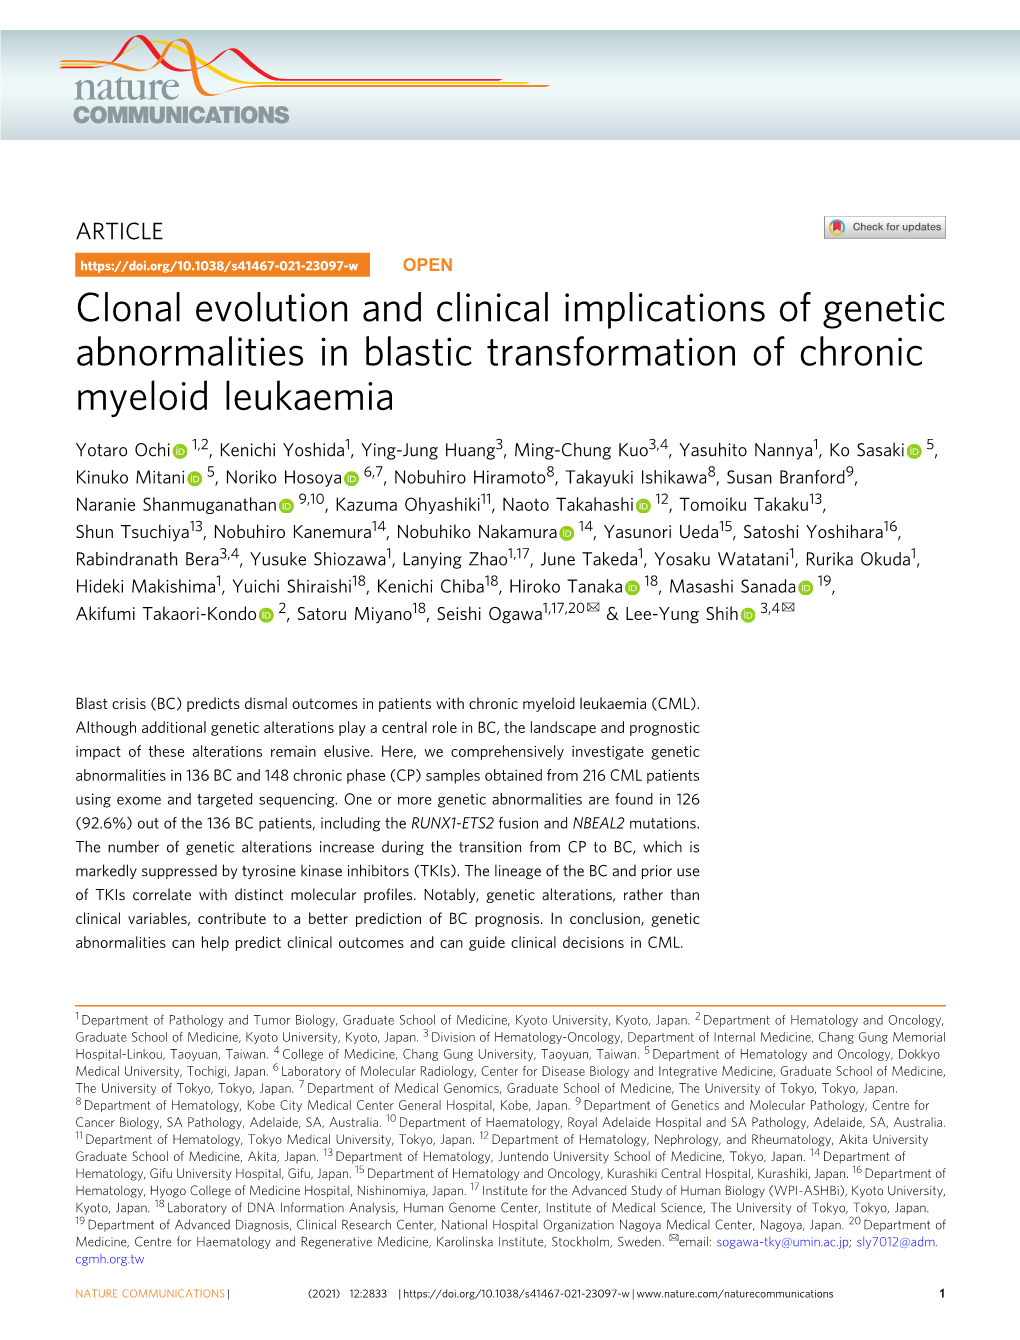 Clonal Evolution and Clinical Implications of Genetic Abnormalities in Blastic Transformation of Chronic Myeloid Leukaemia